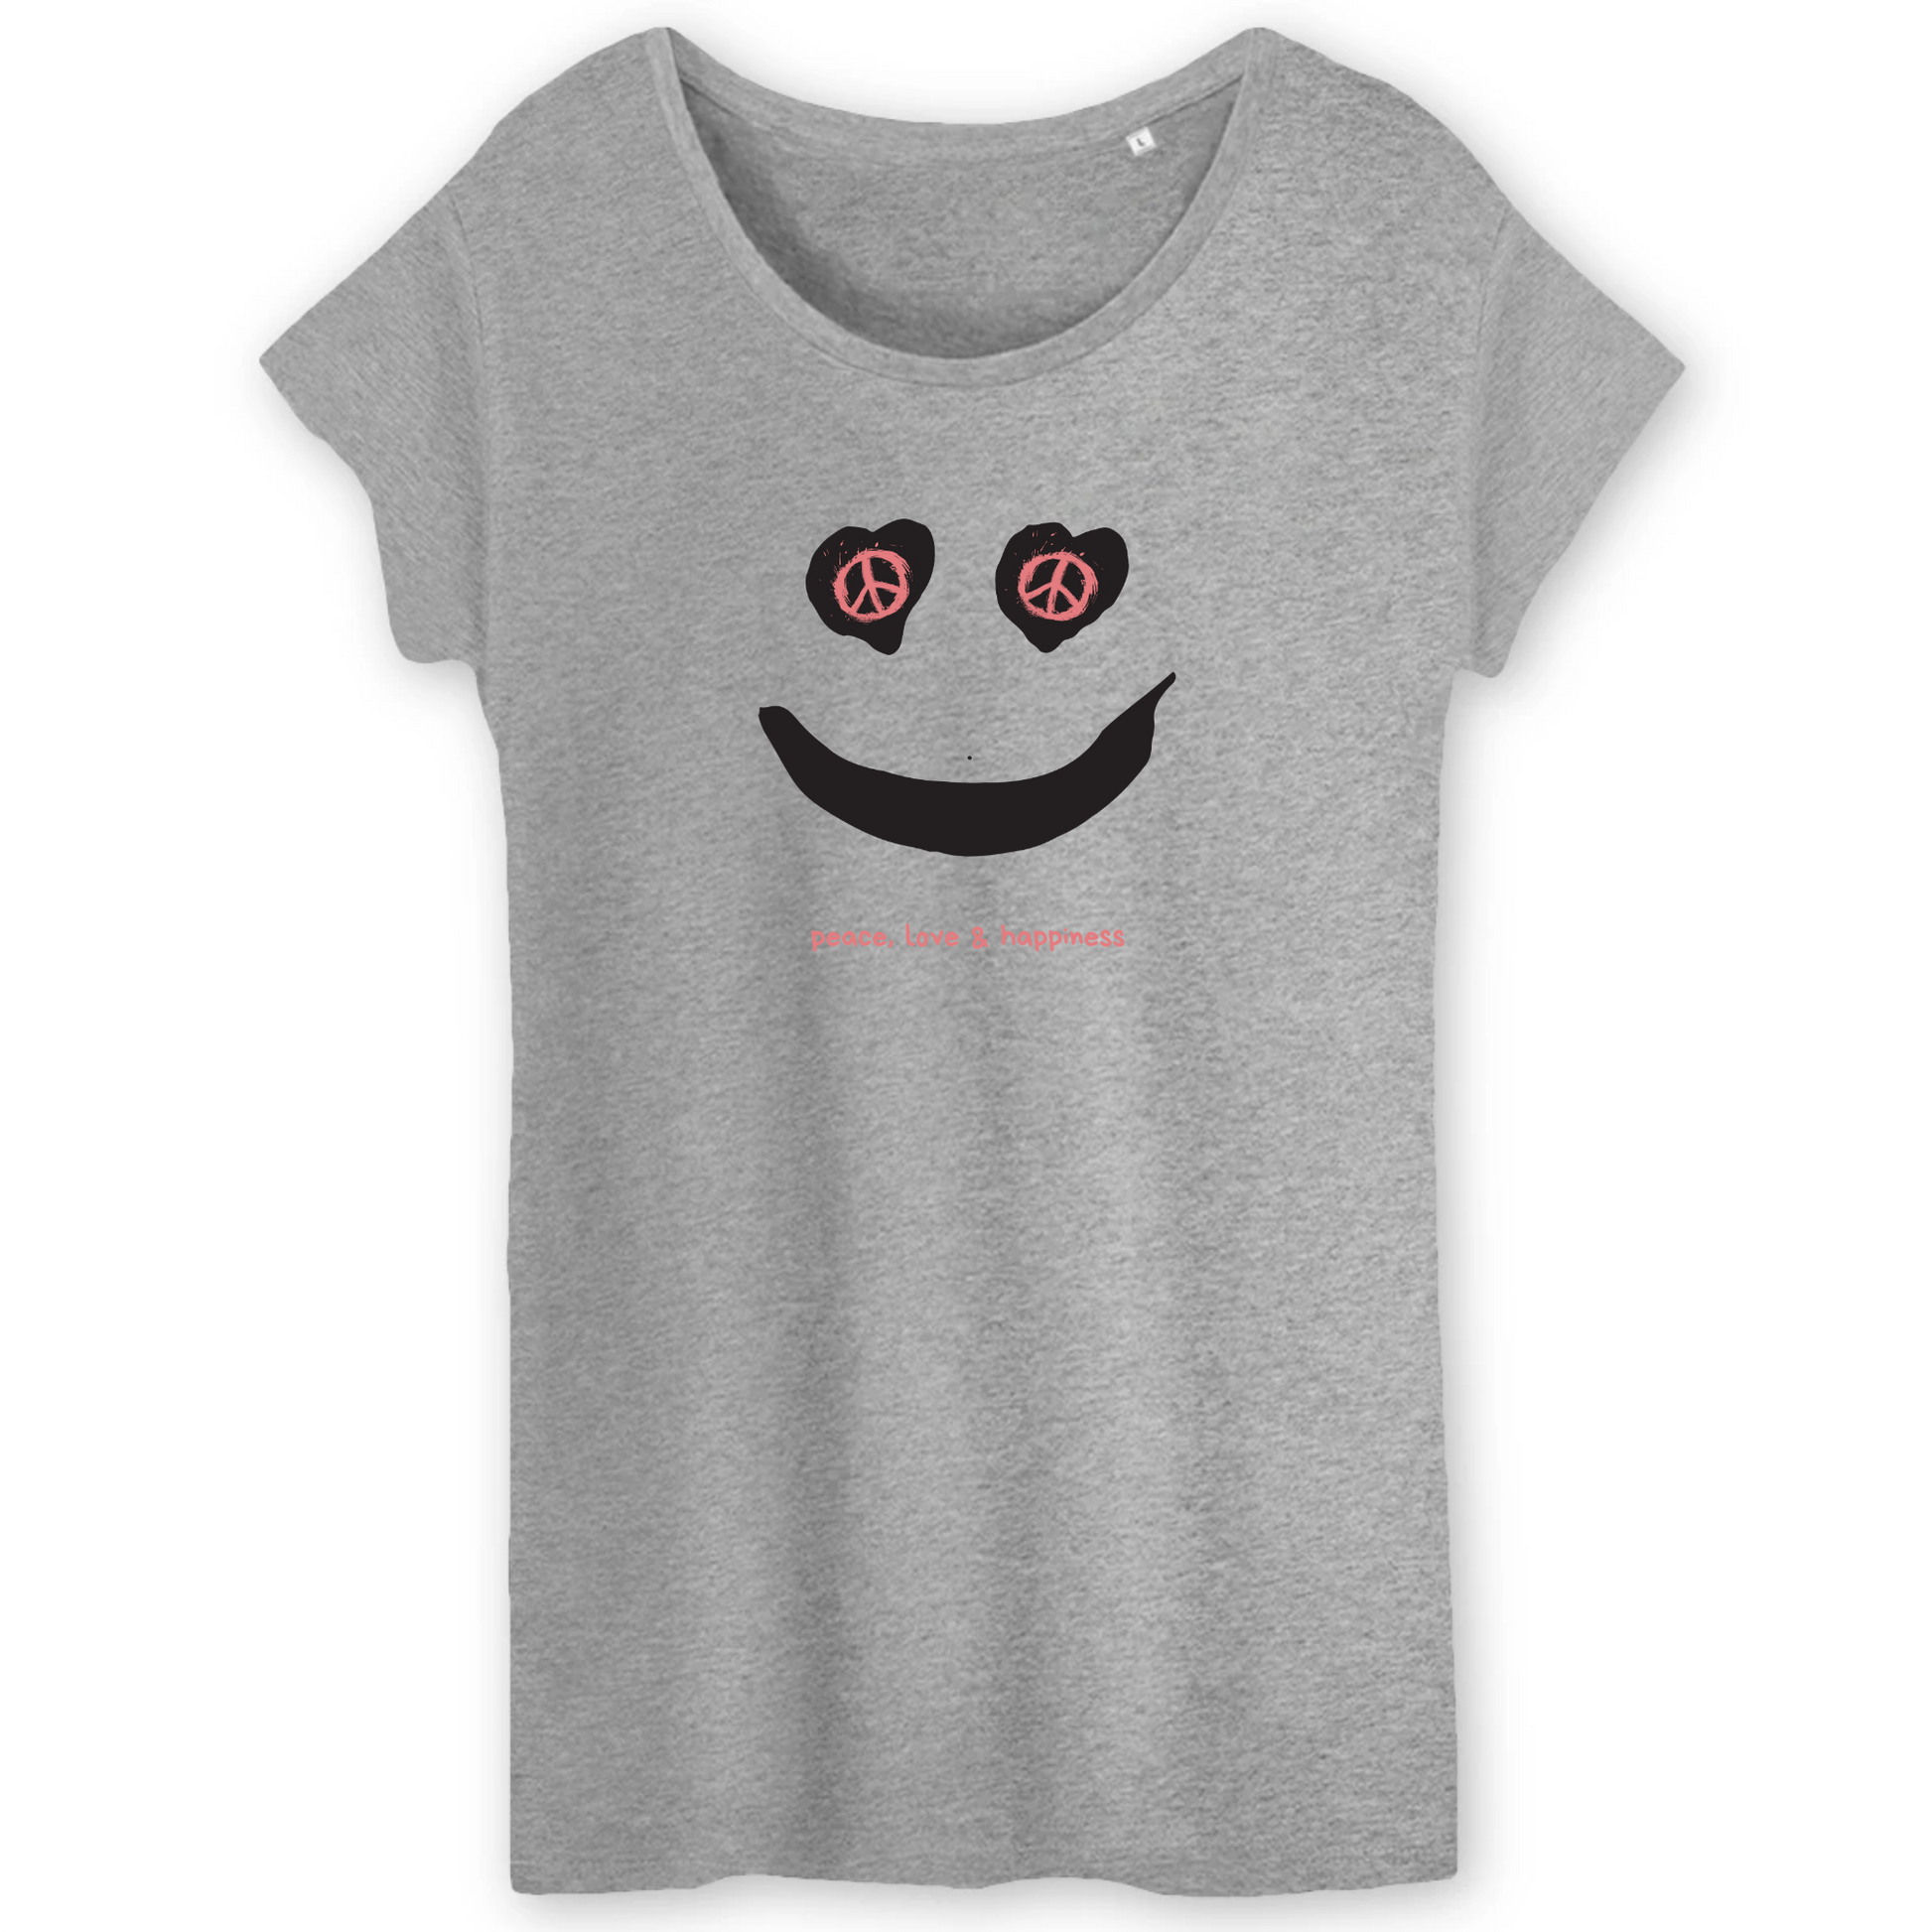 Peace Love & Happyface T-Shirt from T-Pop available from Moon Behind The Hill's Custom Made Apparel range